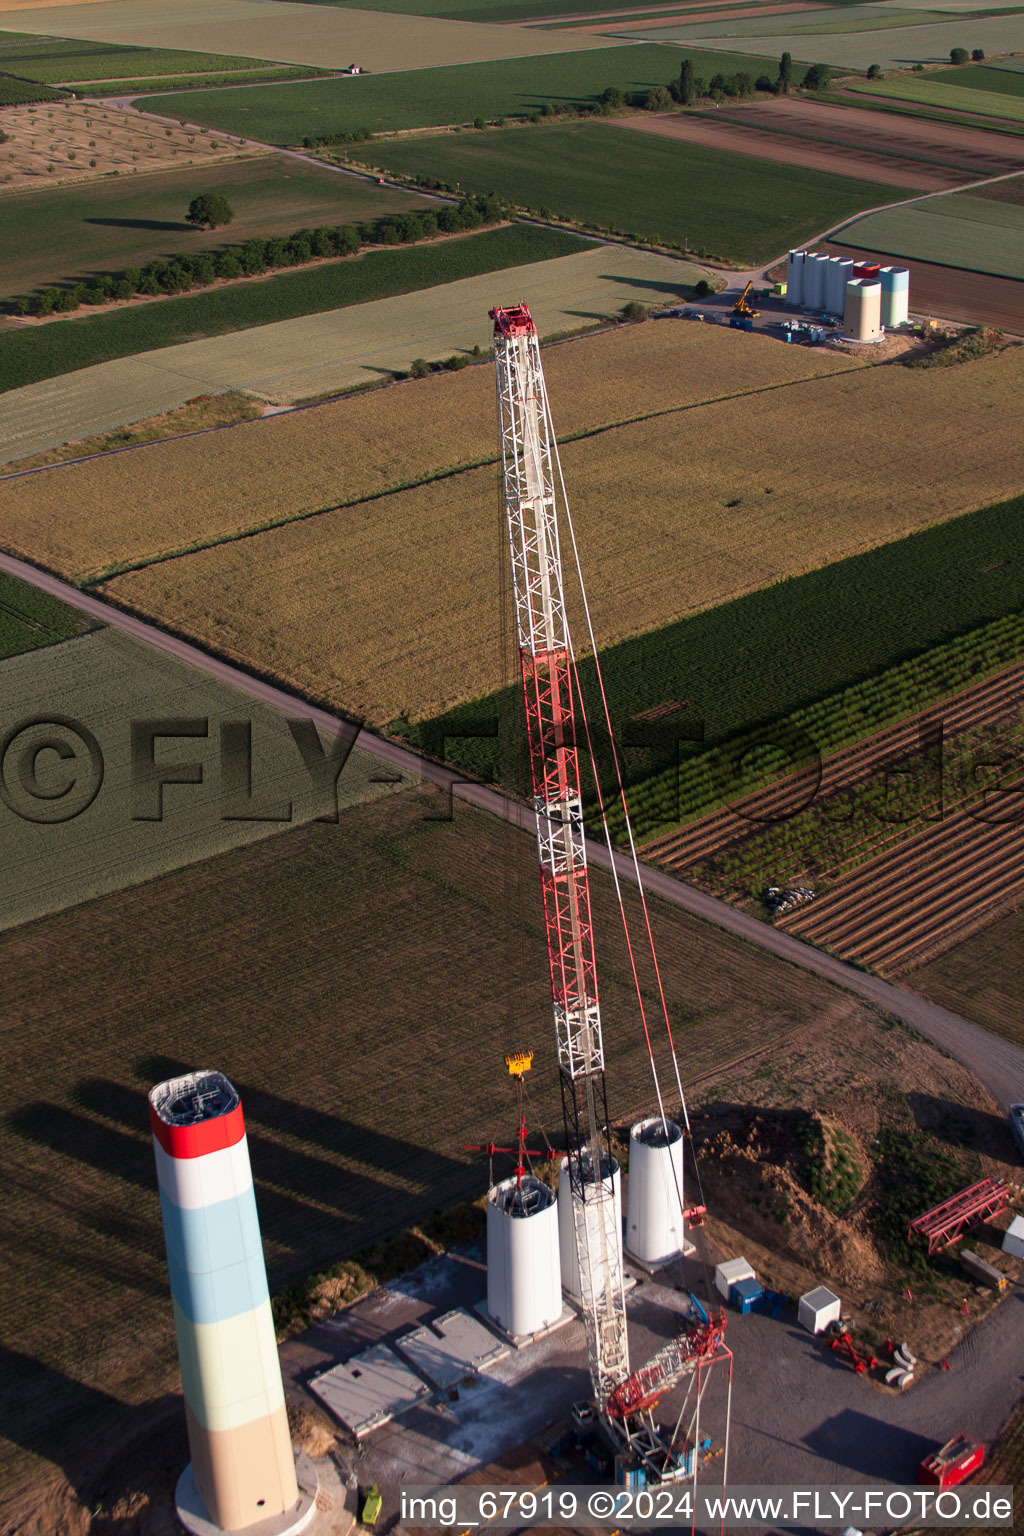 New wind farm in Offenbach an der Queich in the state Rhineland-Palatinate, Germany from the drone perspective